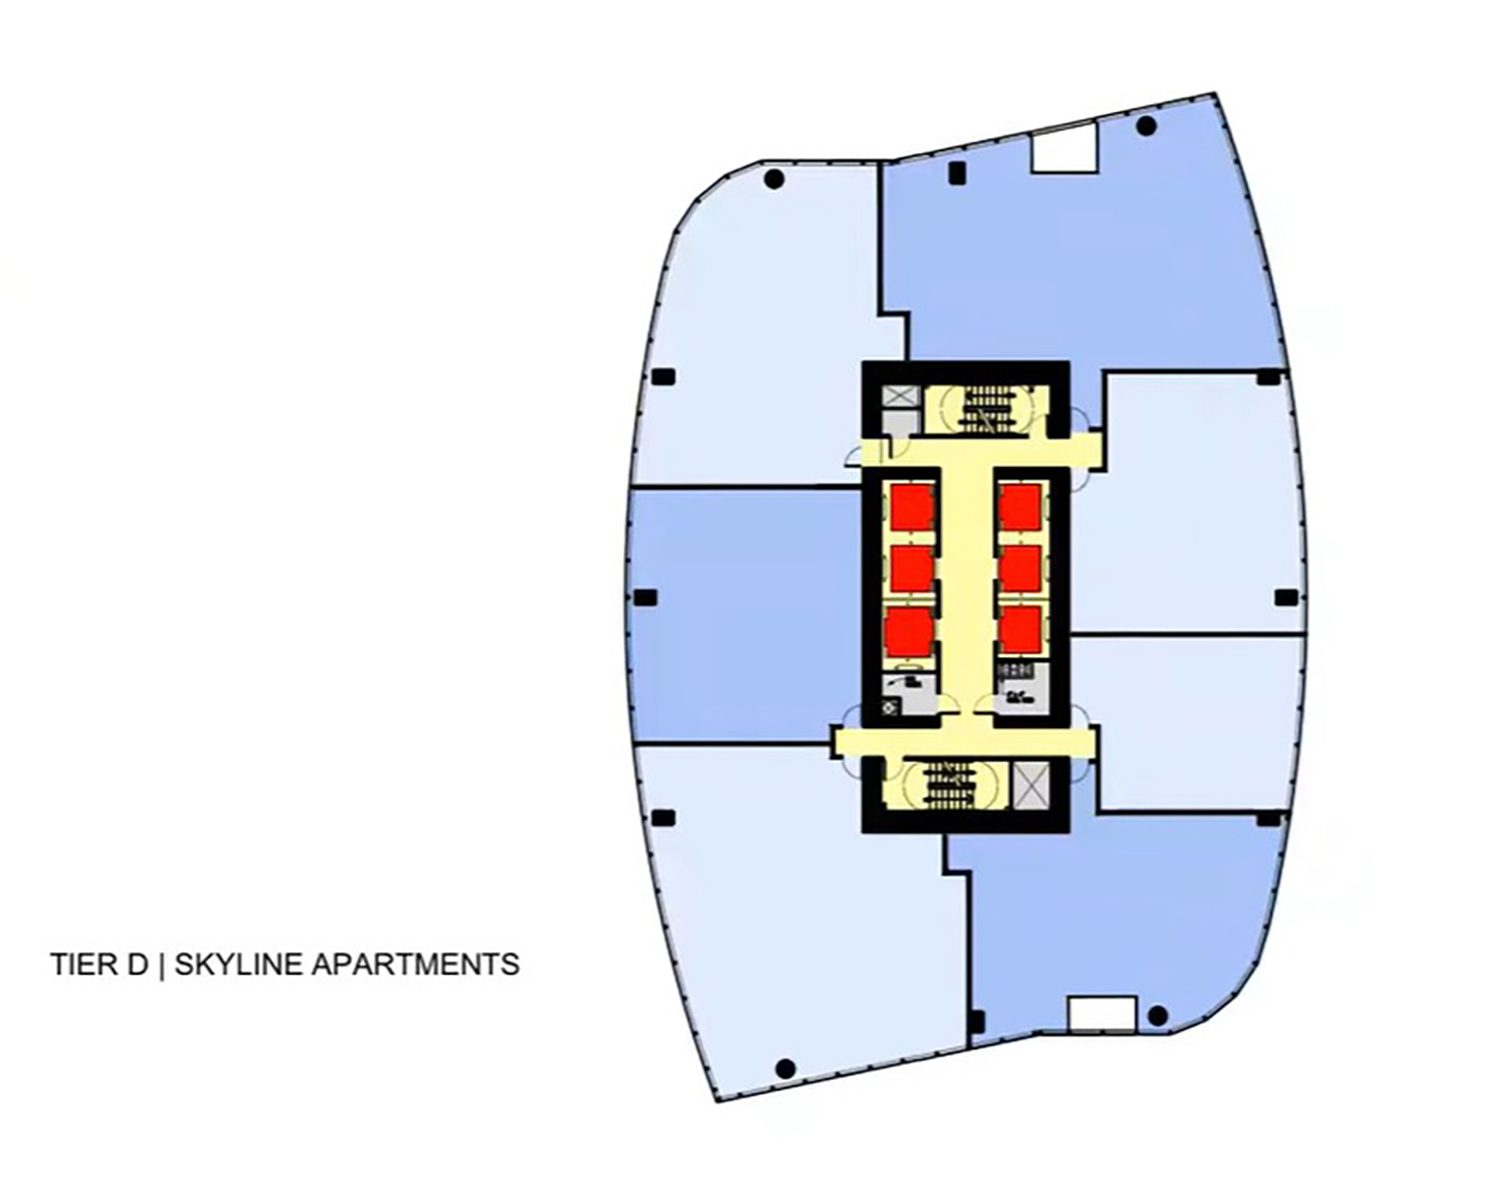 Typical Floor Plan for Tier D Apartments at 1000M. Drawing by JAHN